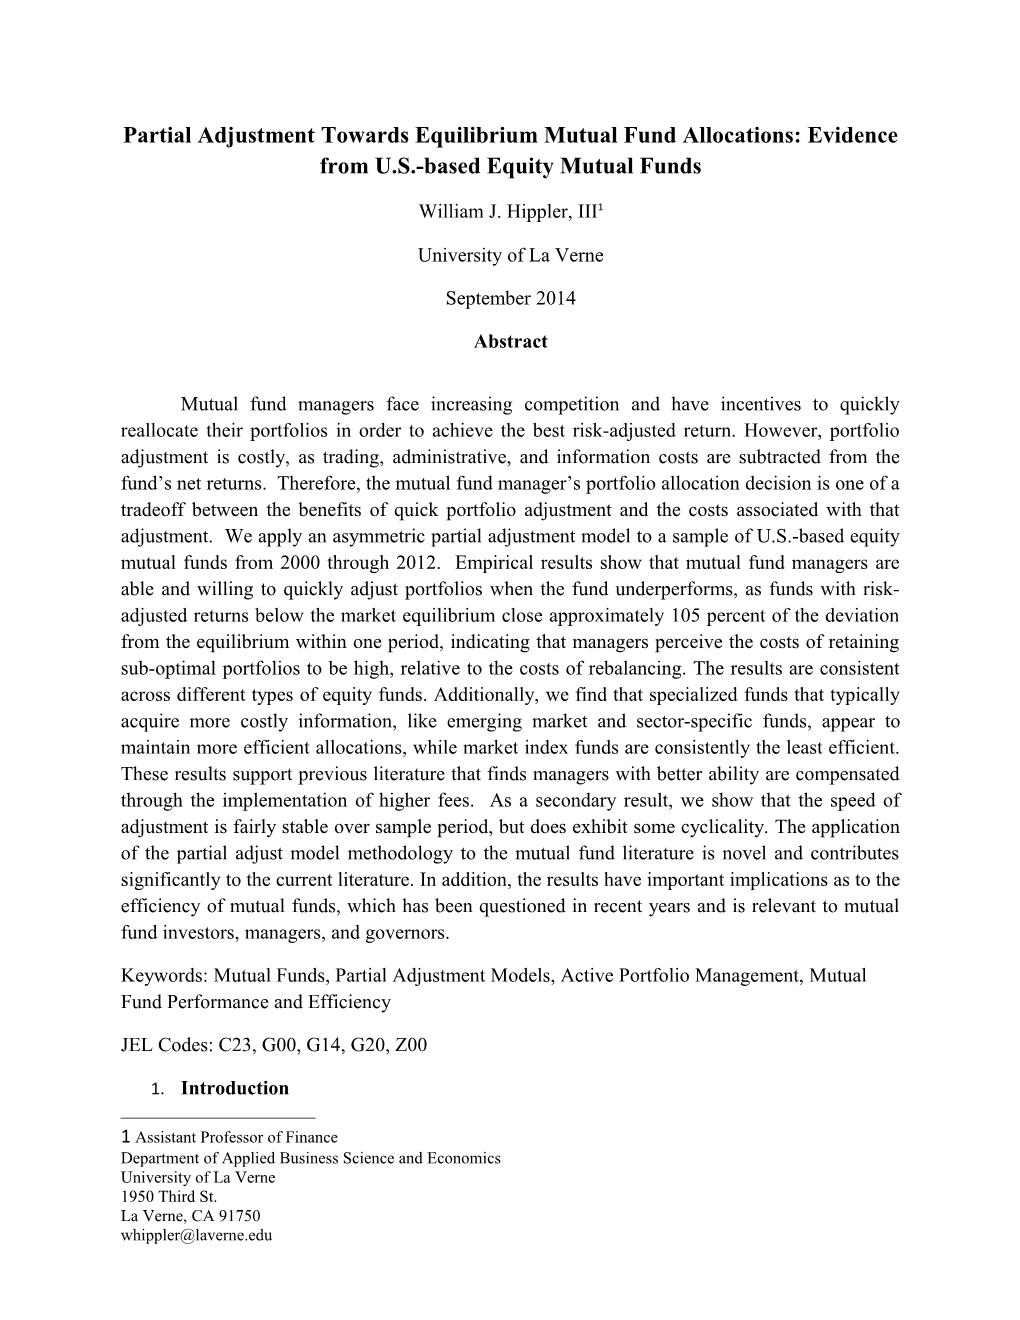 Partial Adjustment Towards Equilibrium Mutual Fund Allocations: Evidence from U.S.-Based